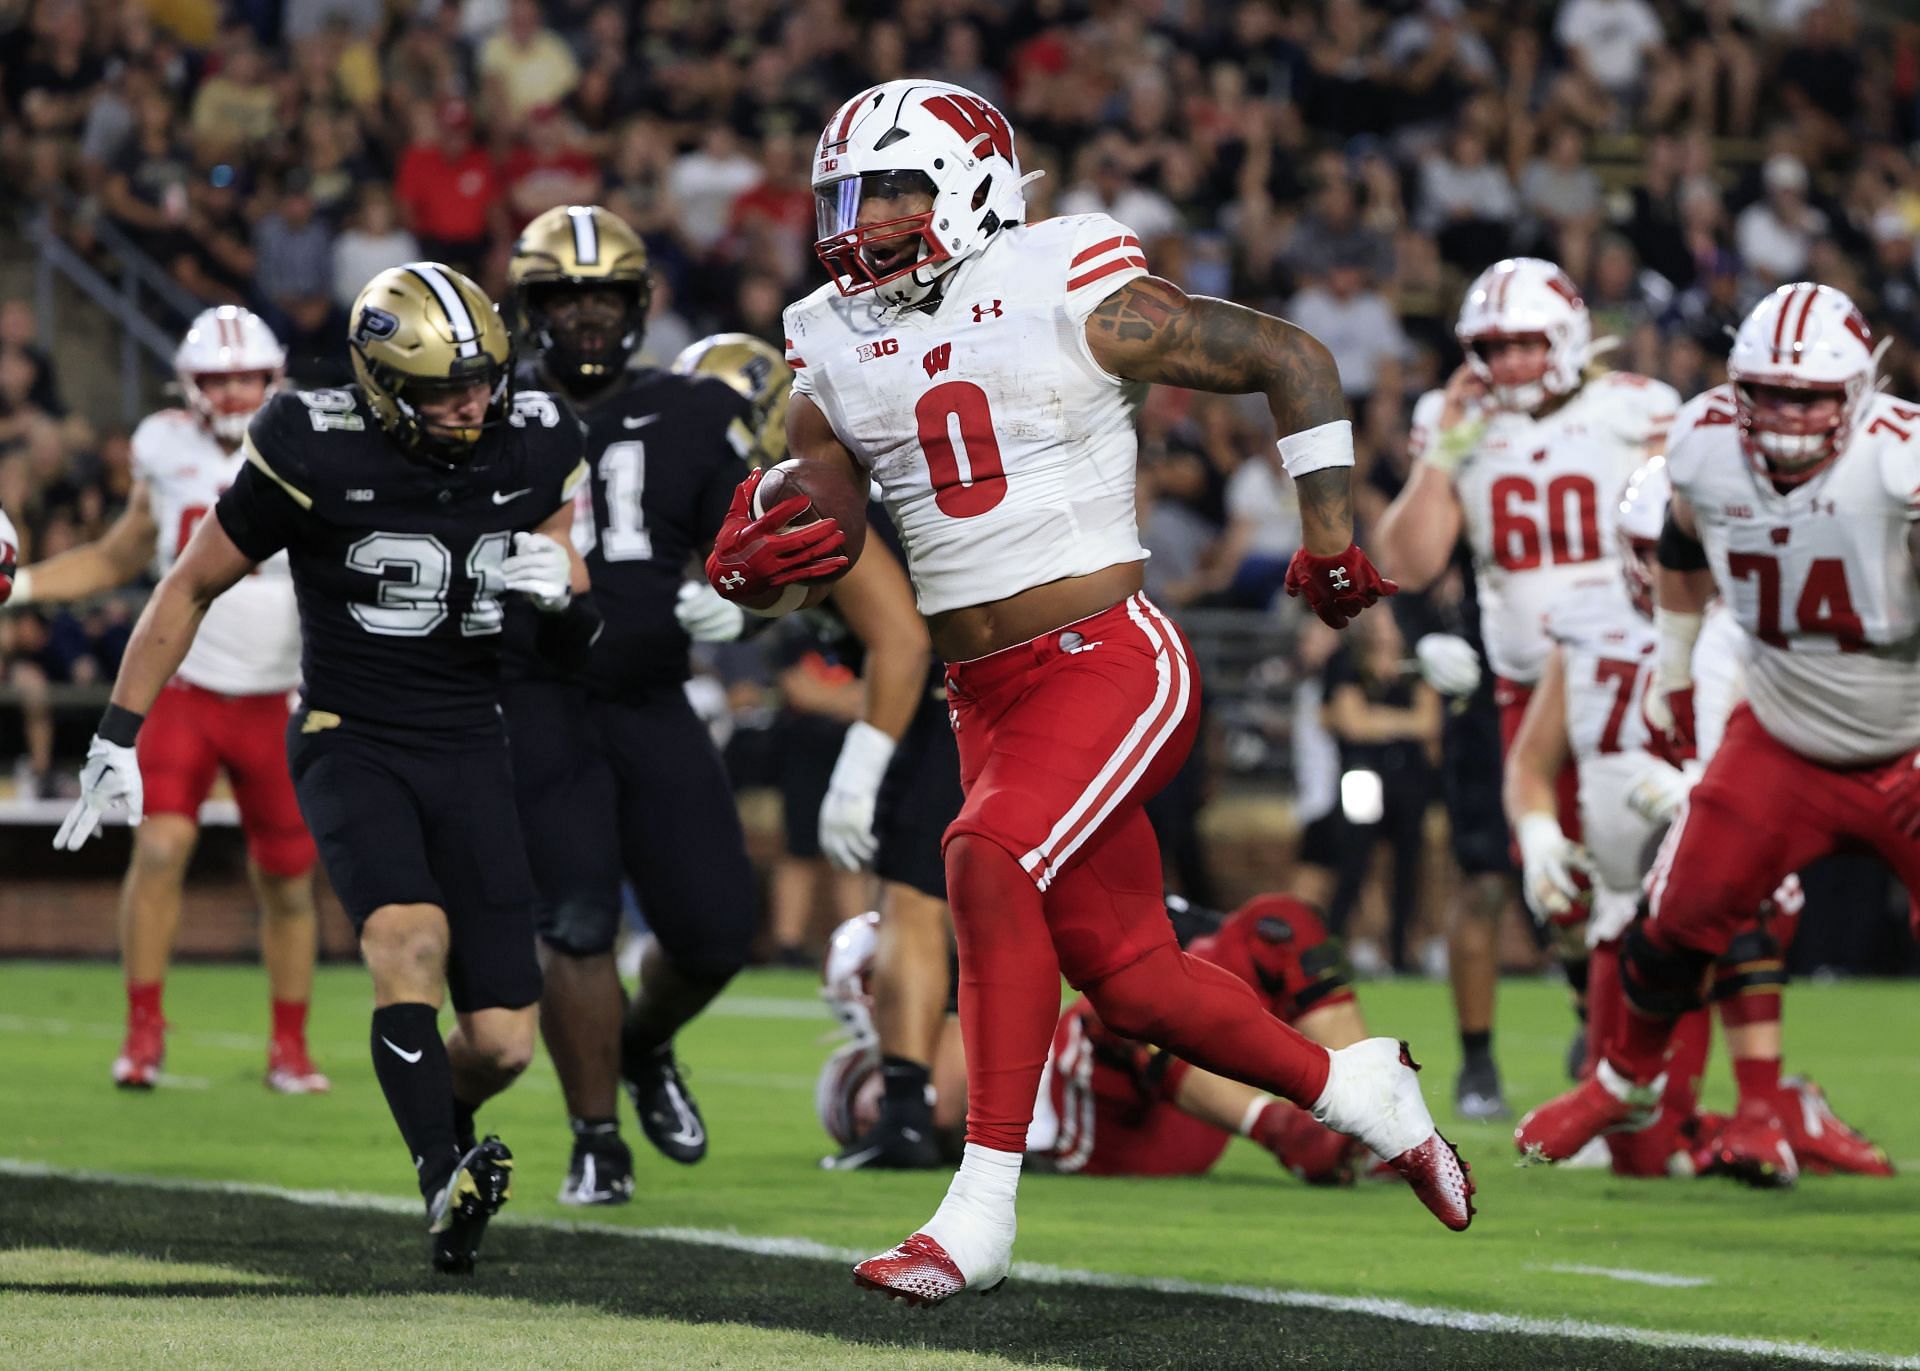 Braelon Allen #0 of the Wisconsin Badgers runs the ball for a touchdown during the second half in the game against the Purdue Boilermakers